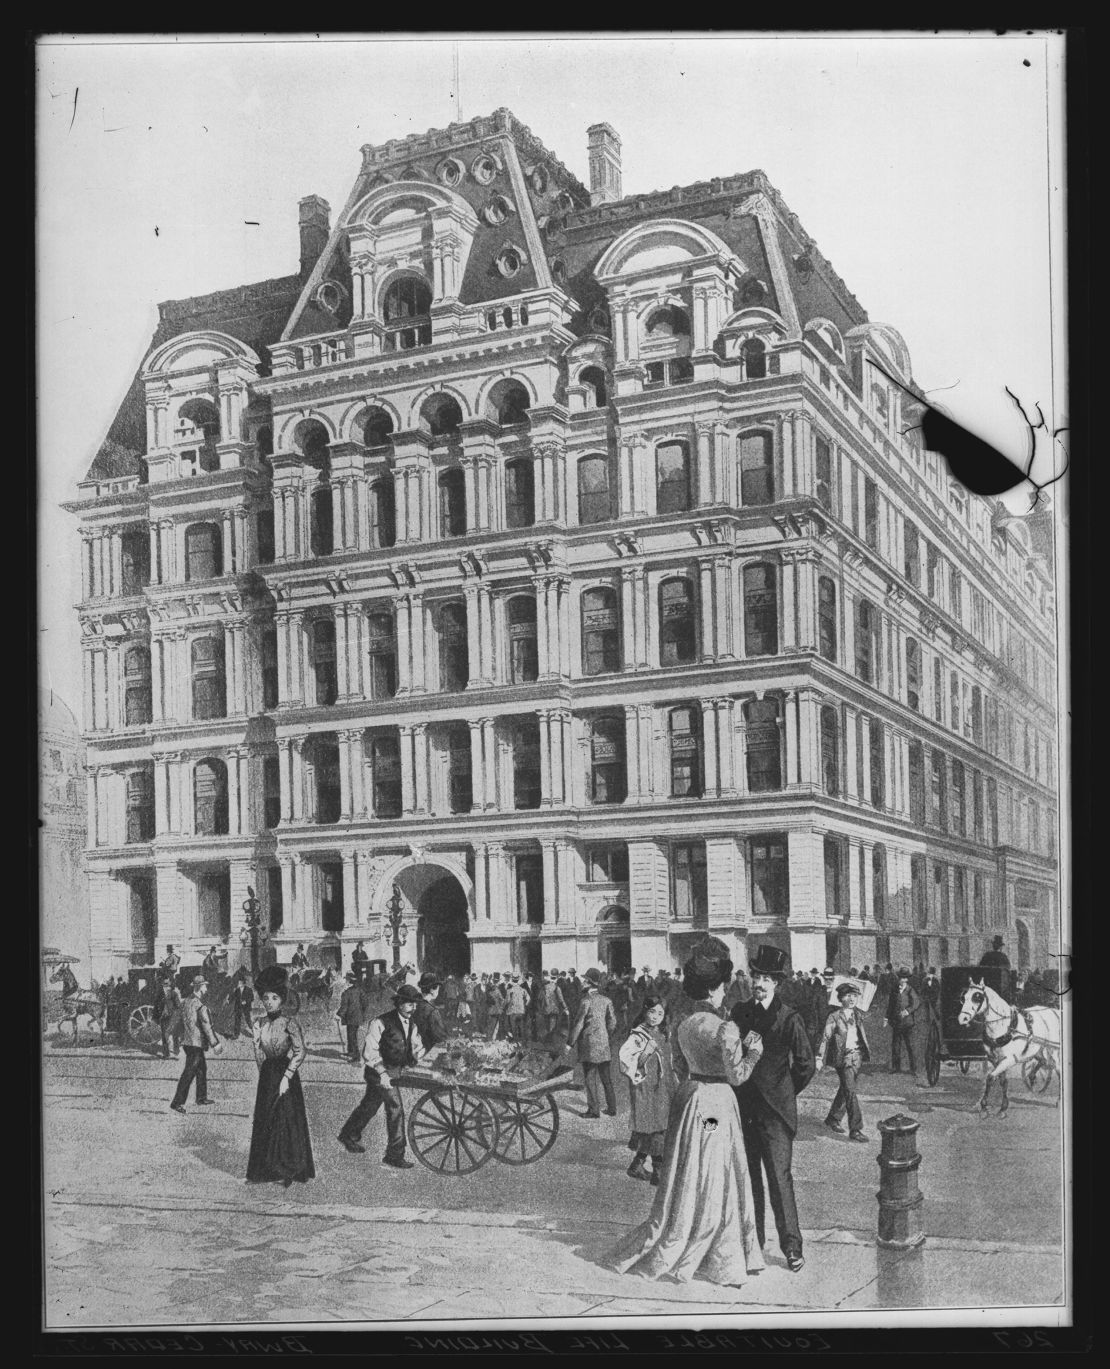 A drawing of the Equitable Life Building in New York, which opened in 1870.